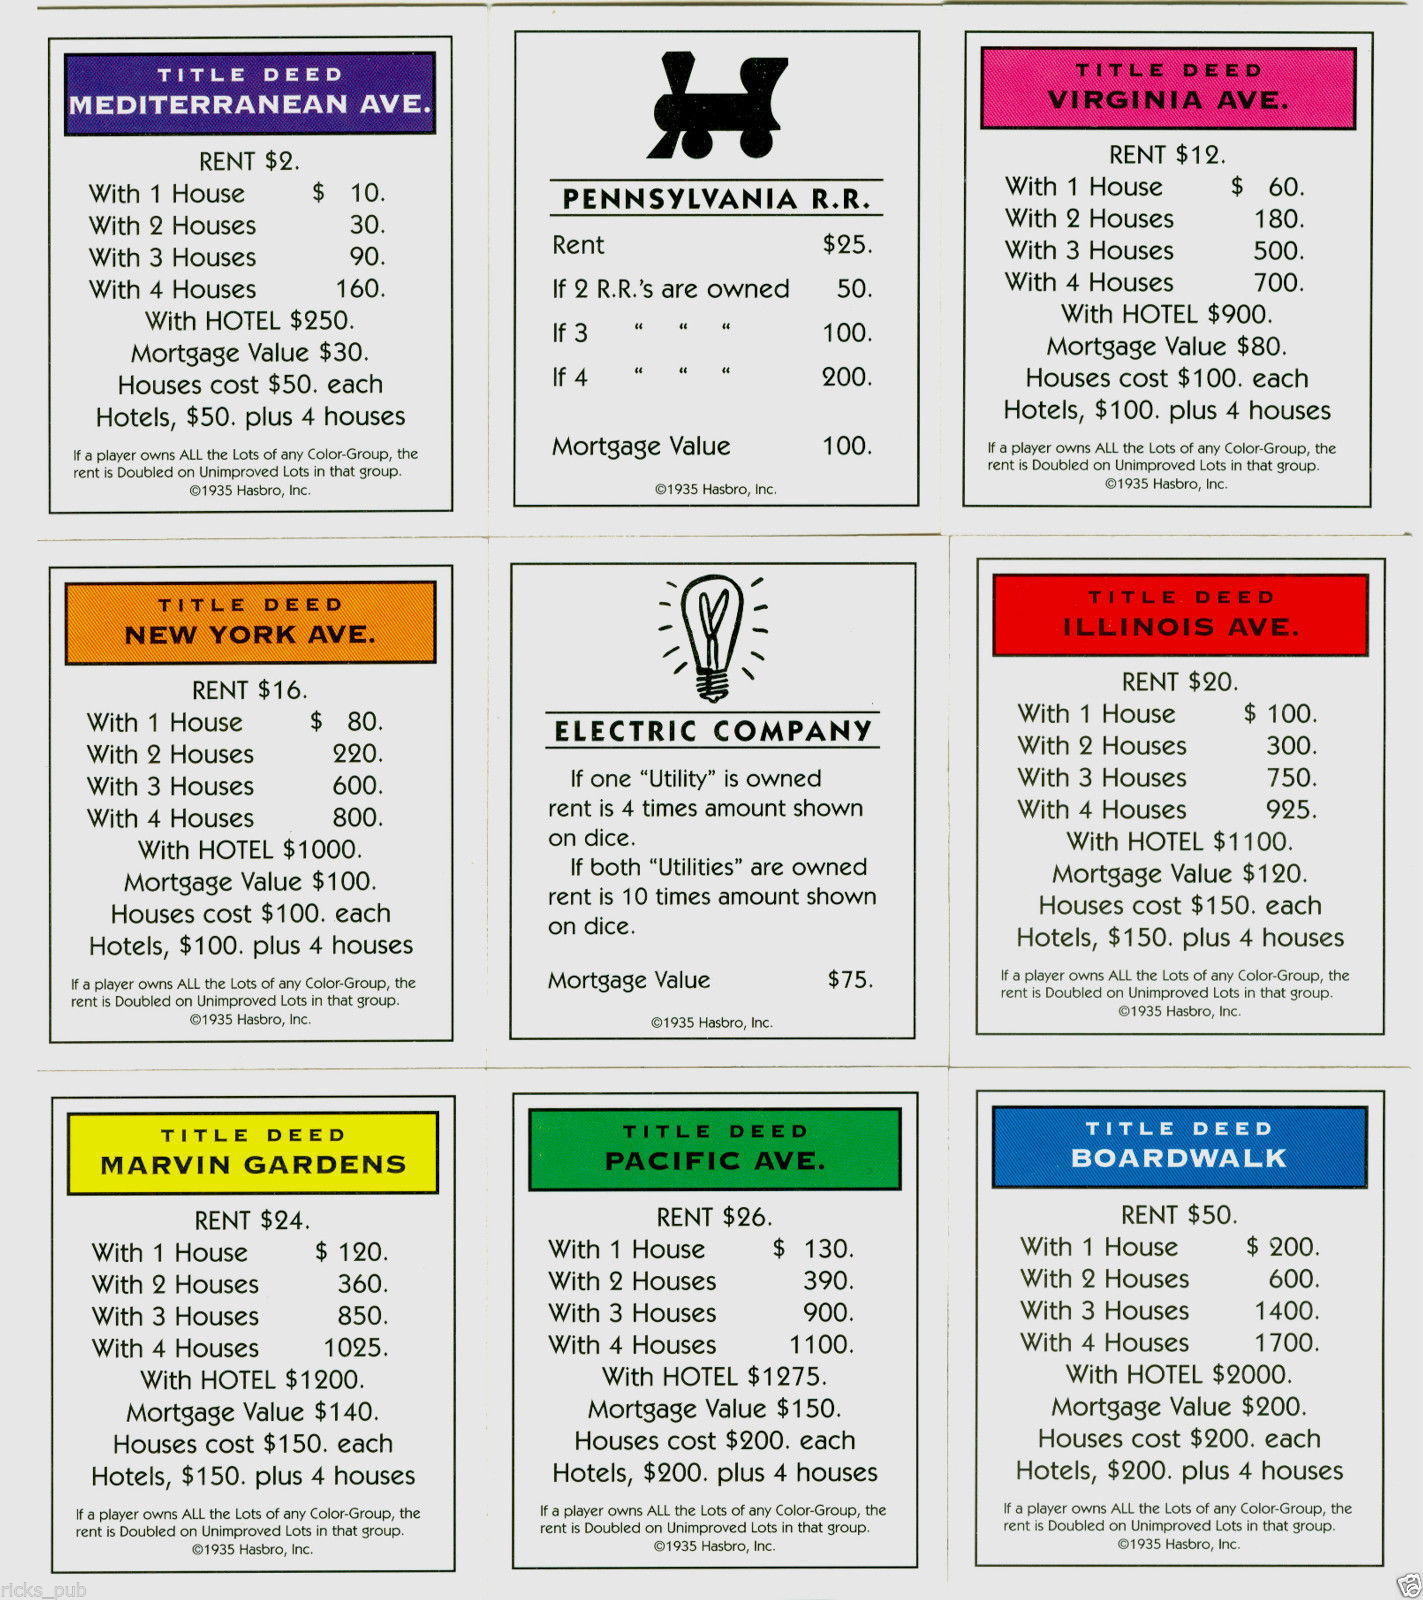 1C1 Monopoly Chance Card Template | Wiring Library For Monopoly Chance Cards Template